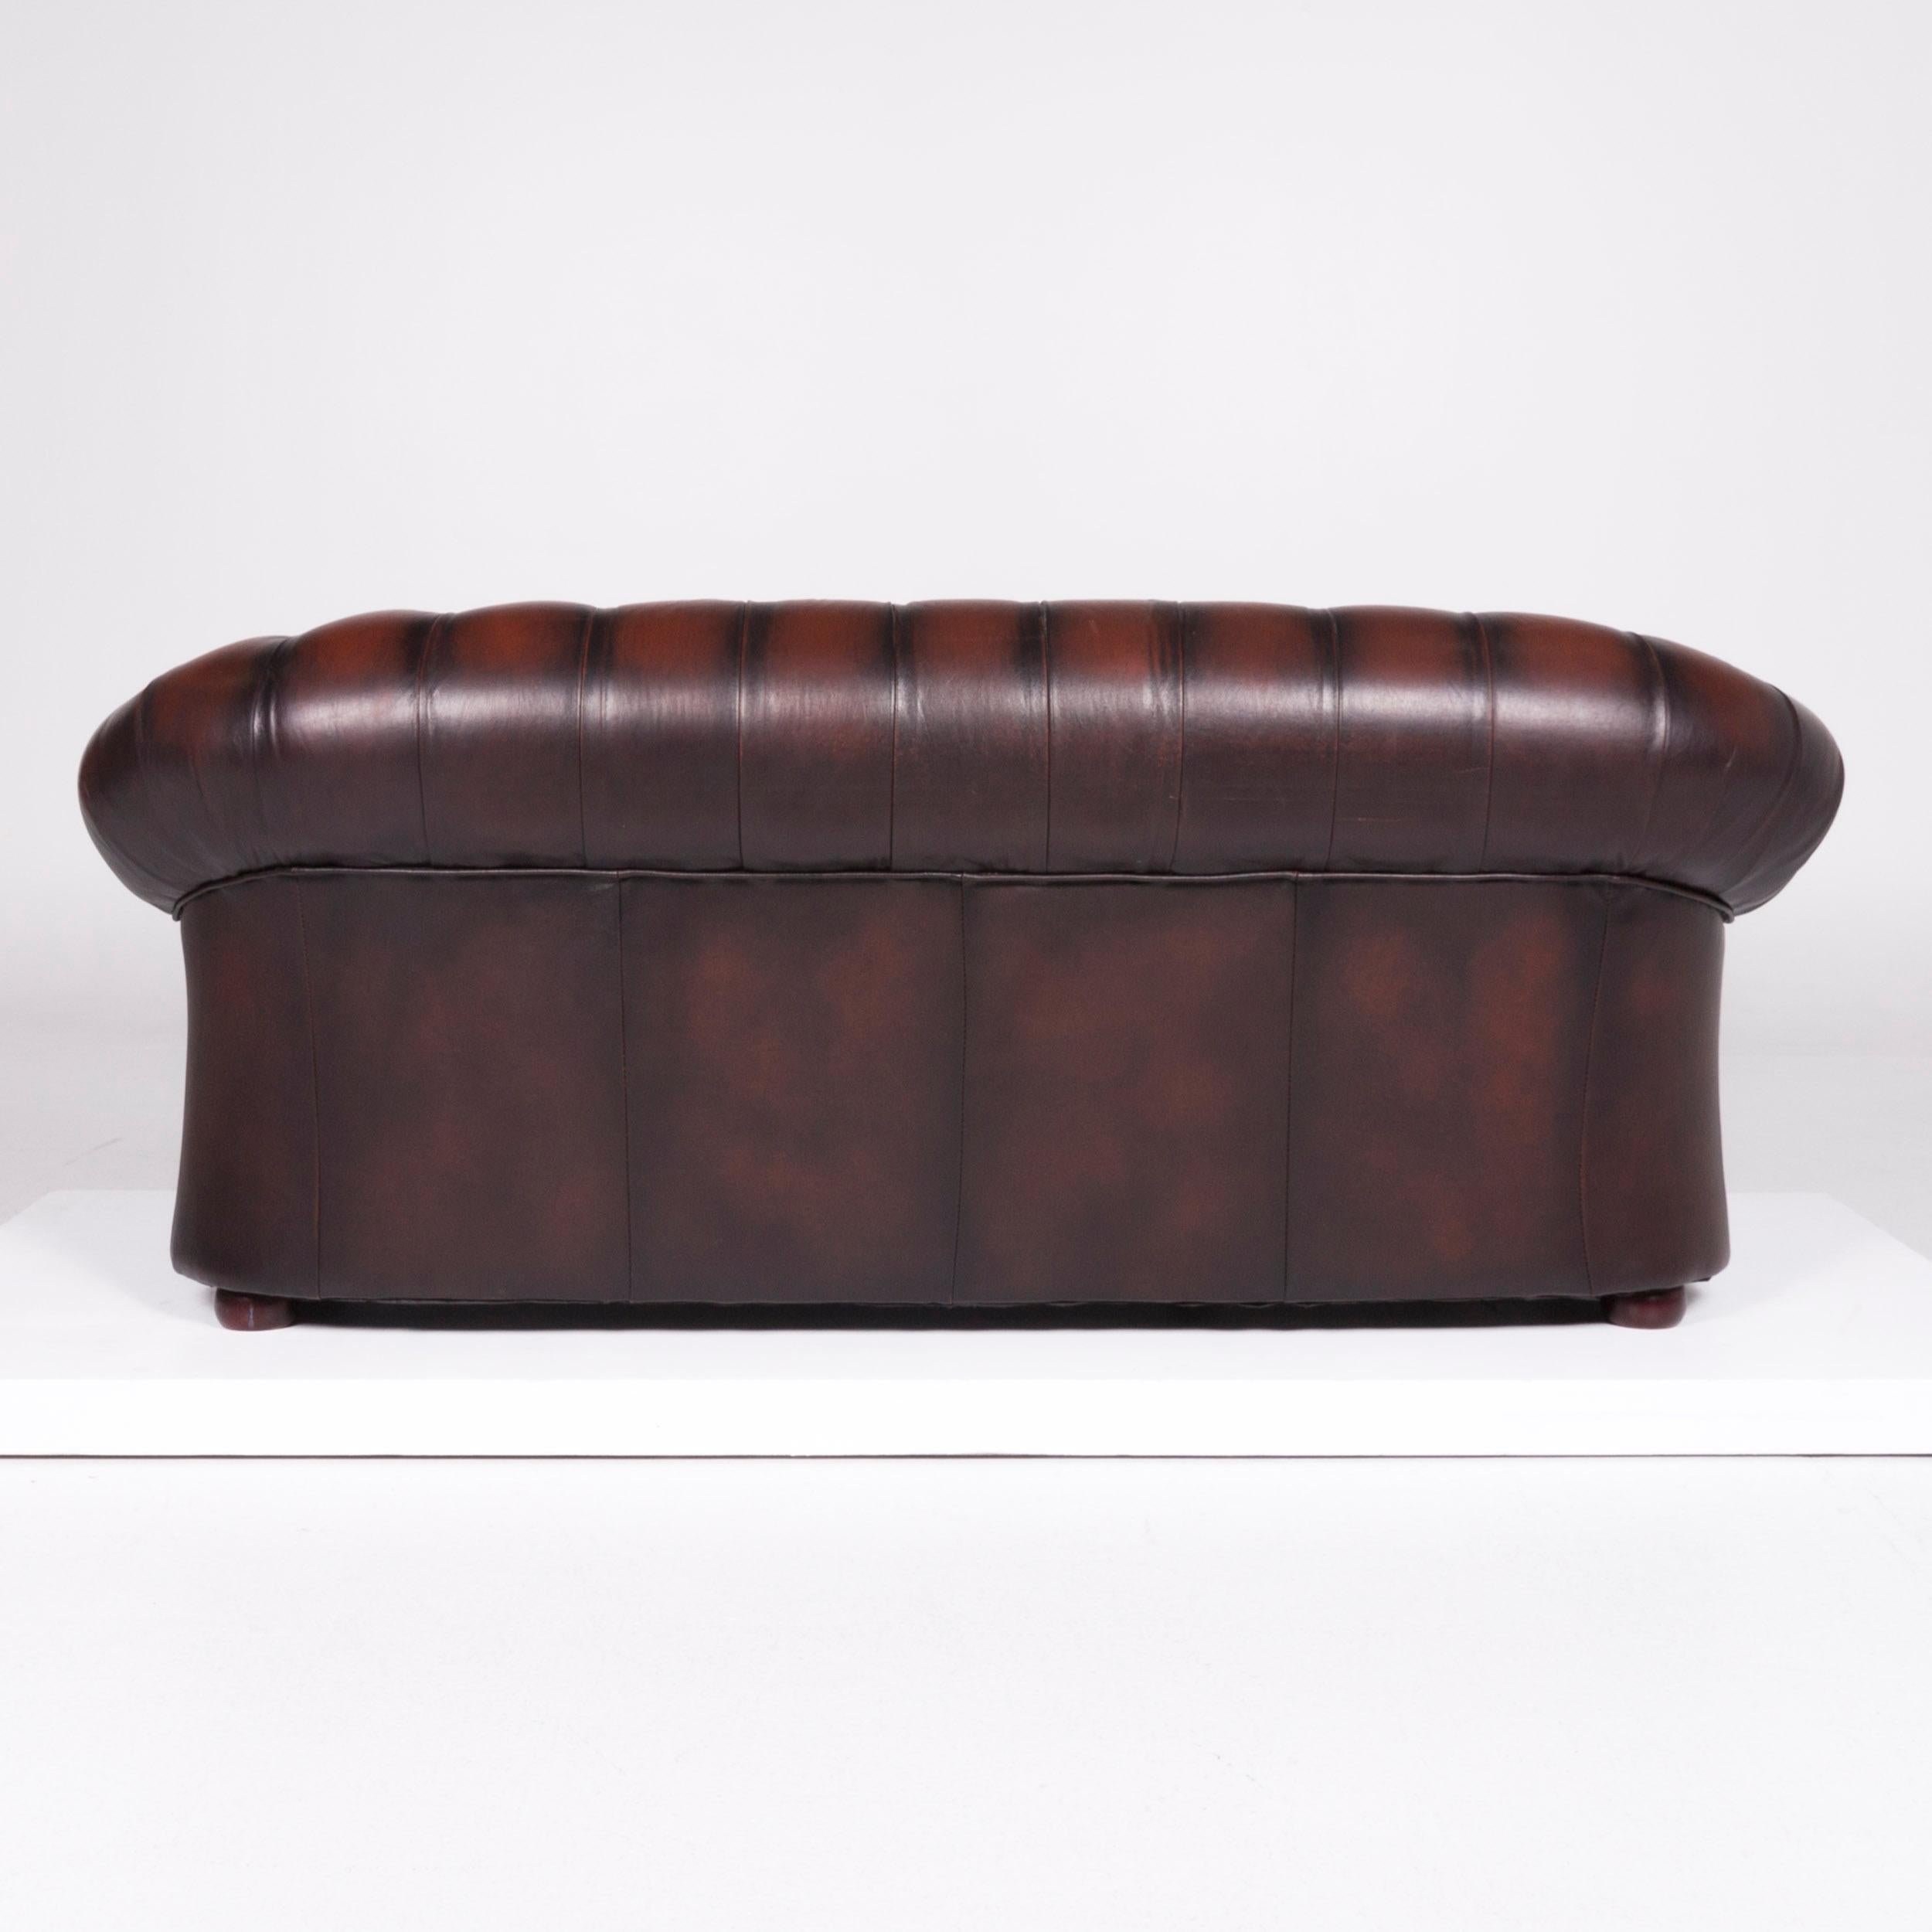 Contemporary Centurion Leather Sofa Brown Three-Seat Chesterfield